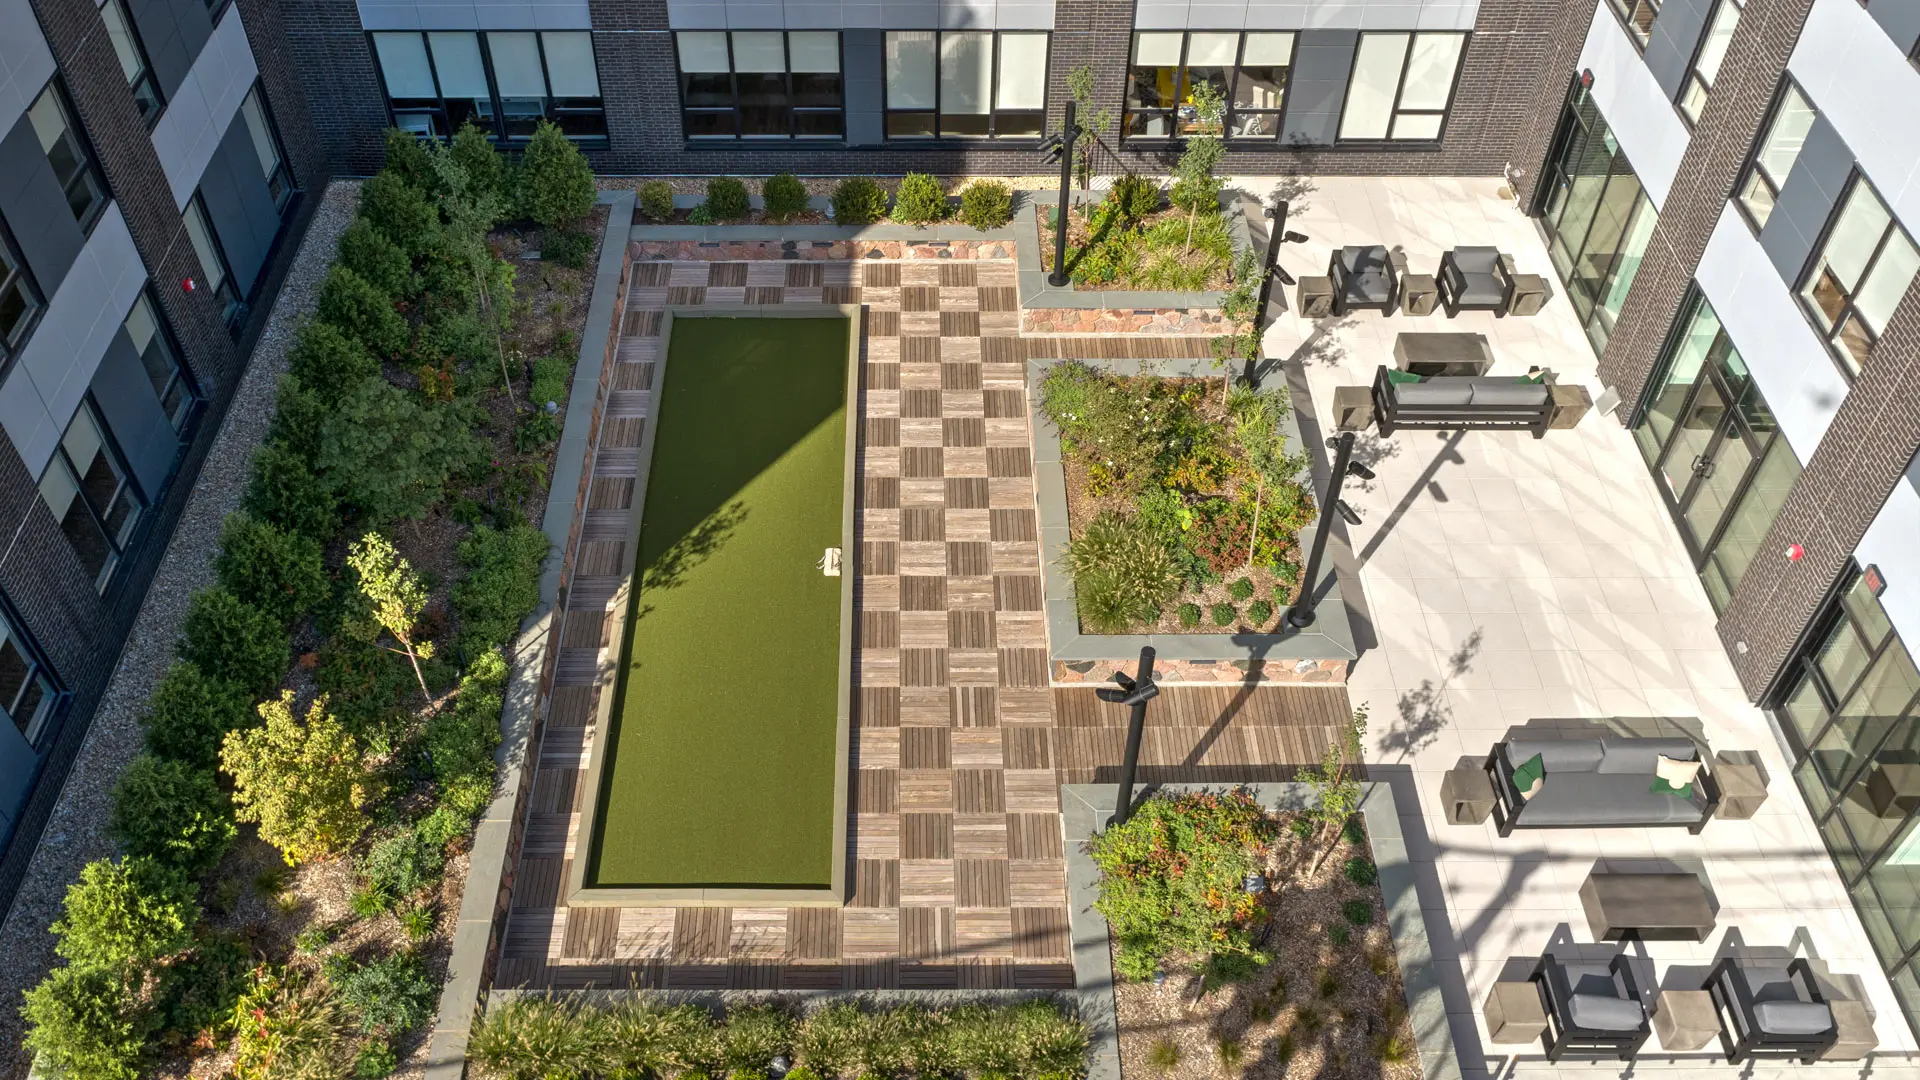 Rooftop view of the bocce court at American House Oak Park, a senior community in Oak Park Illinois